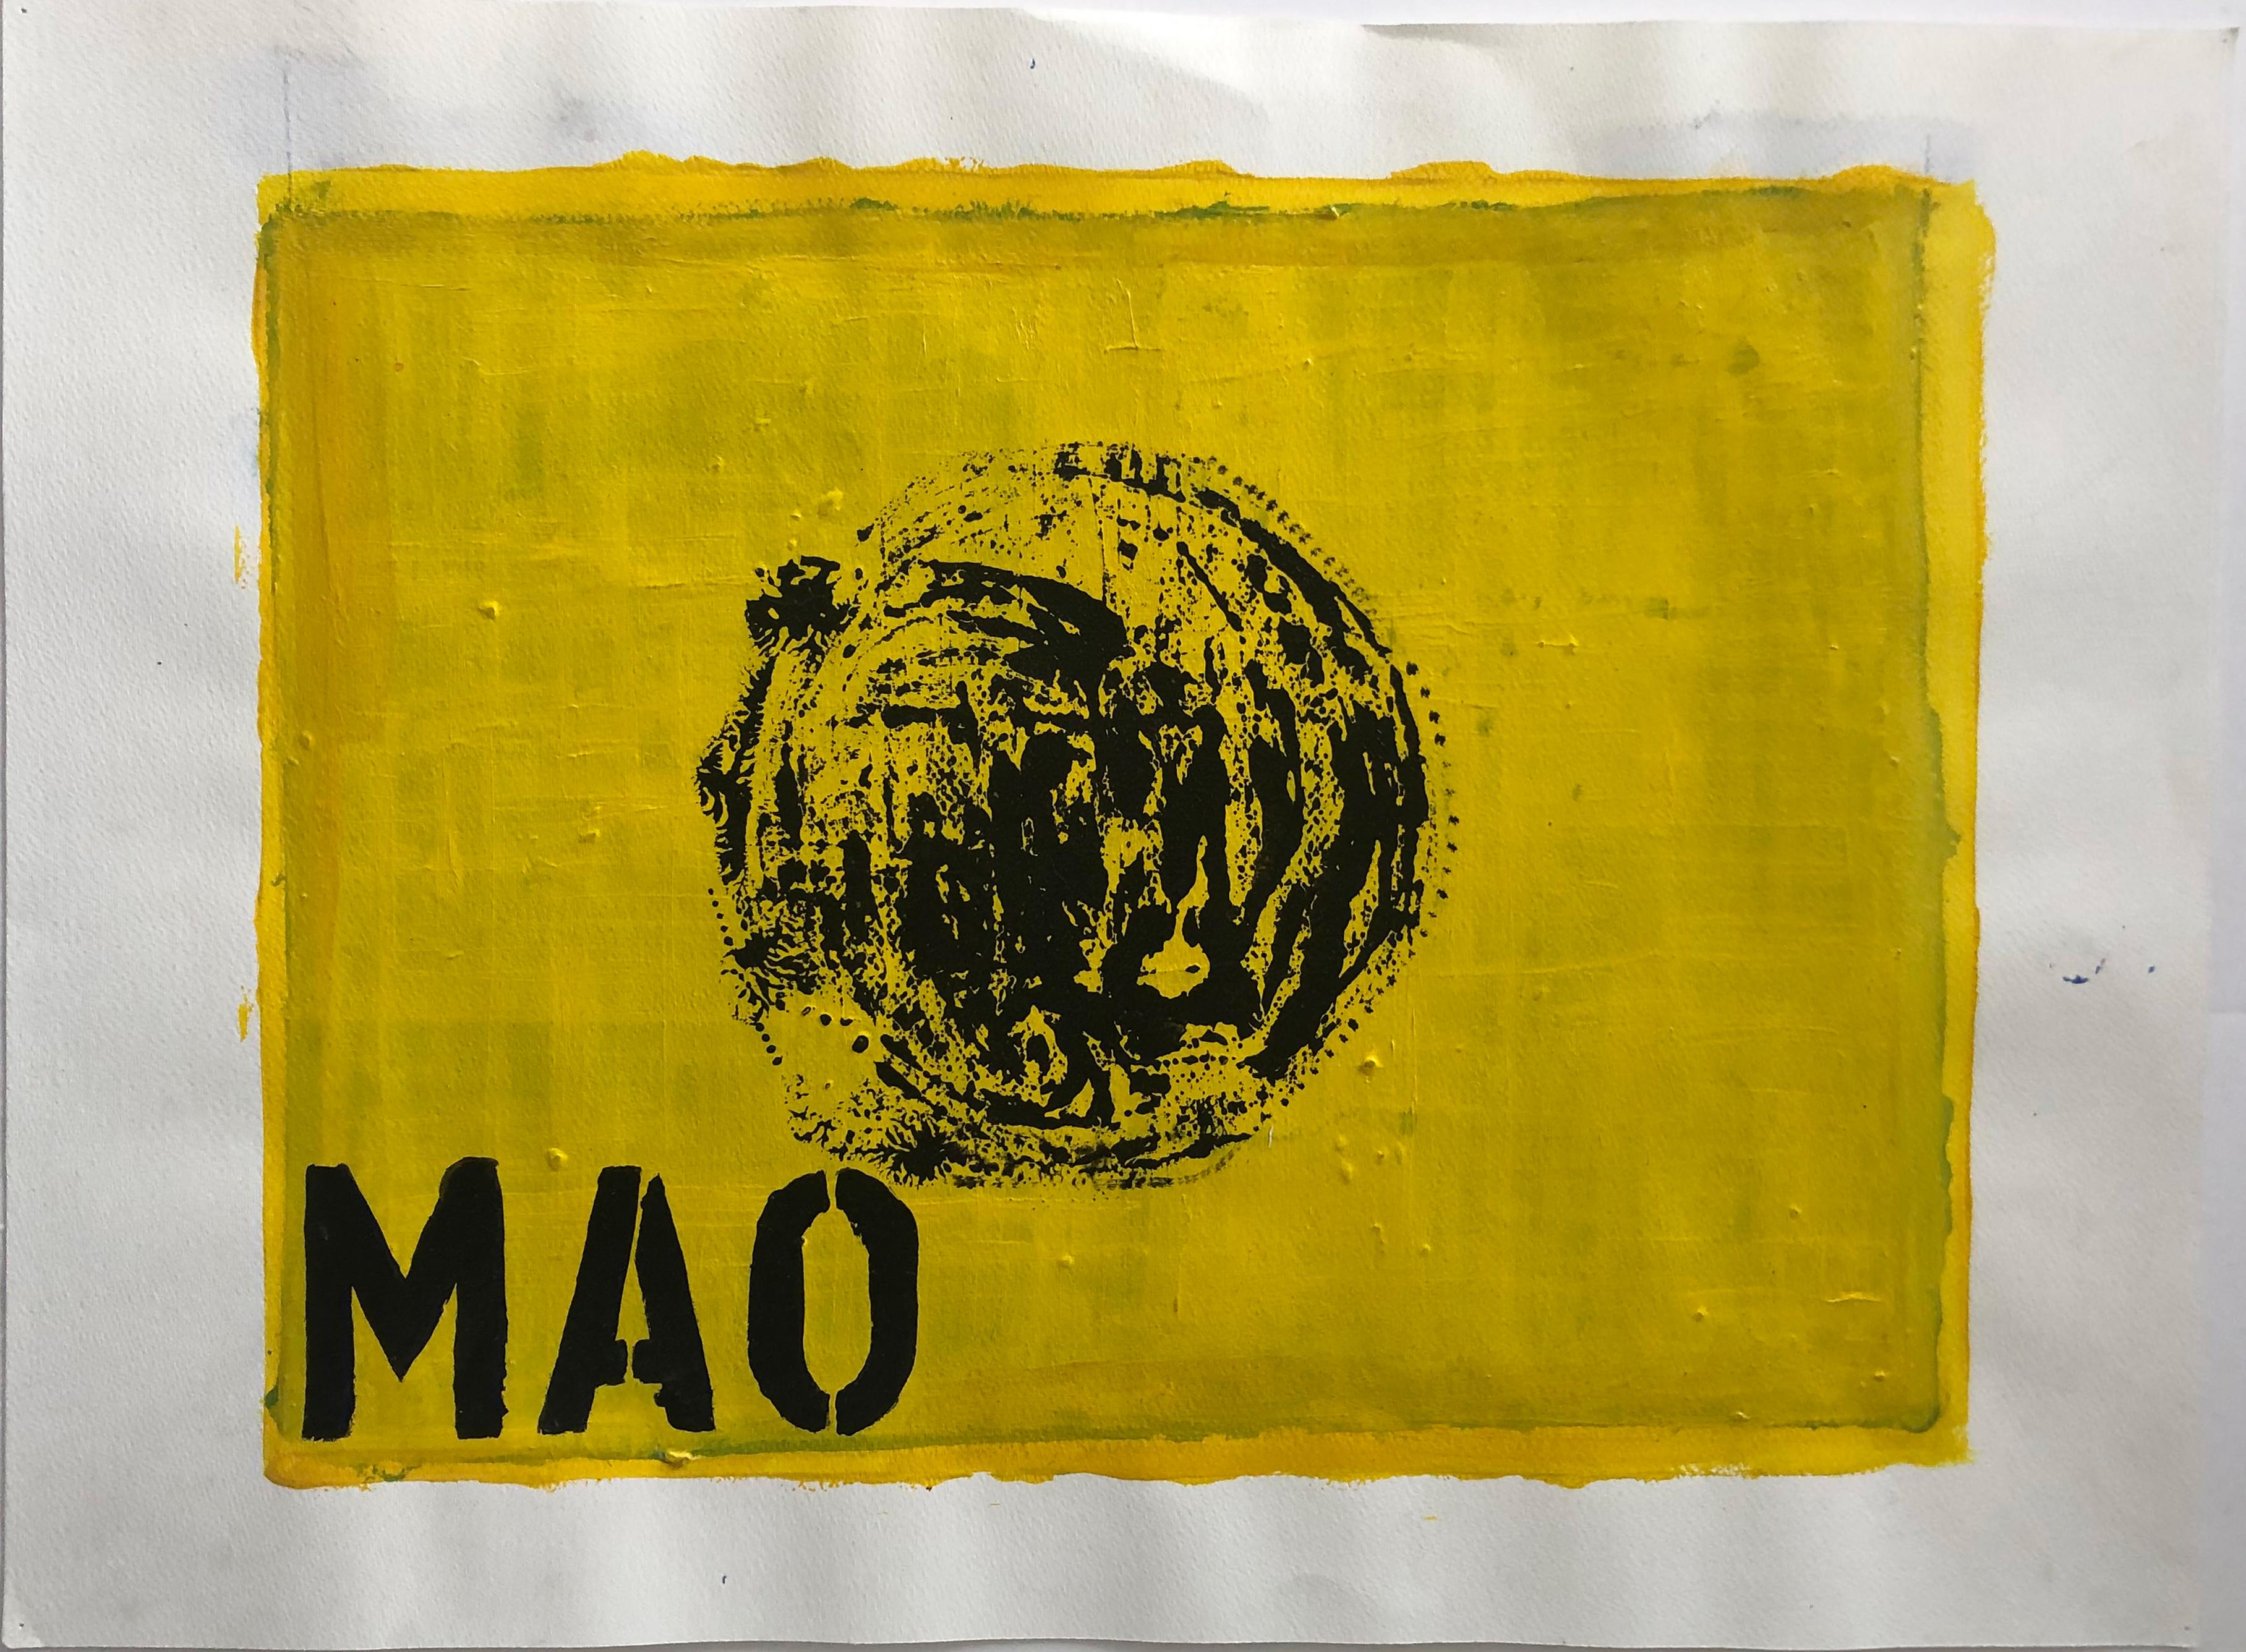 Mao, Abstract Painting on canvas. From the Chaleco Quimico series